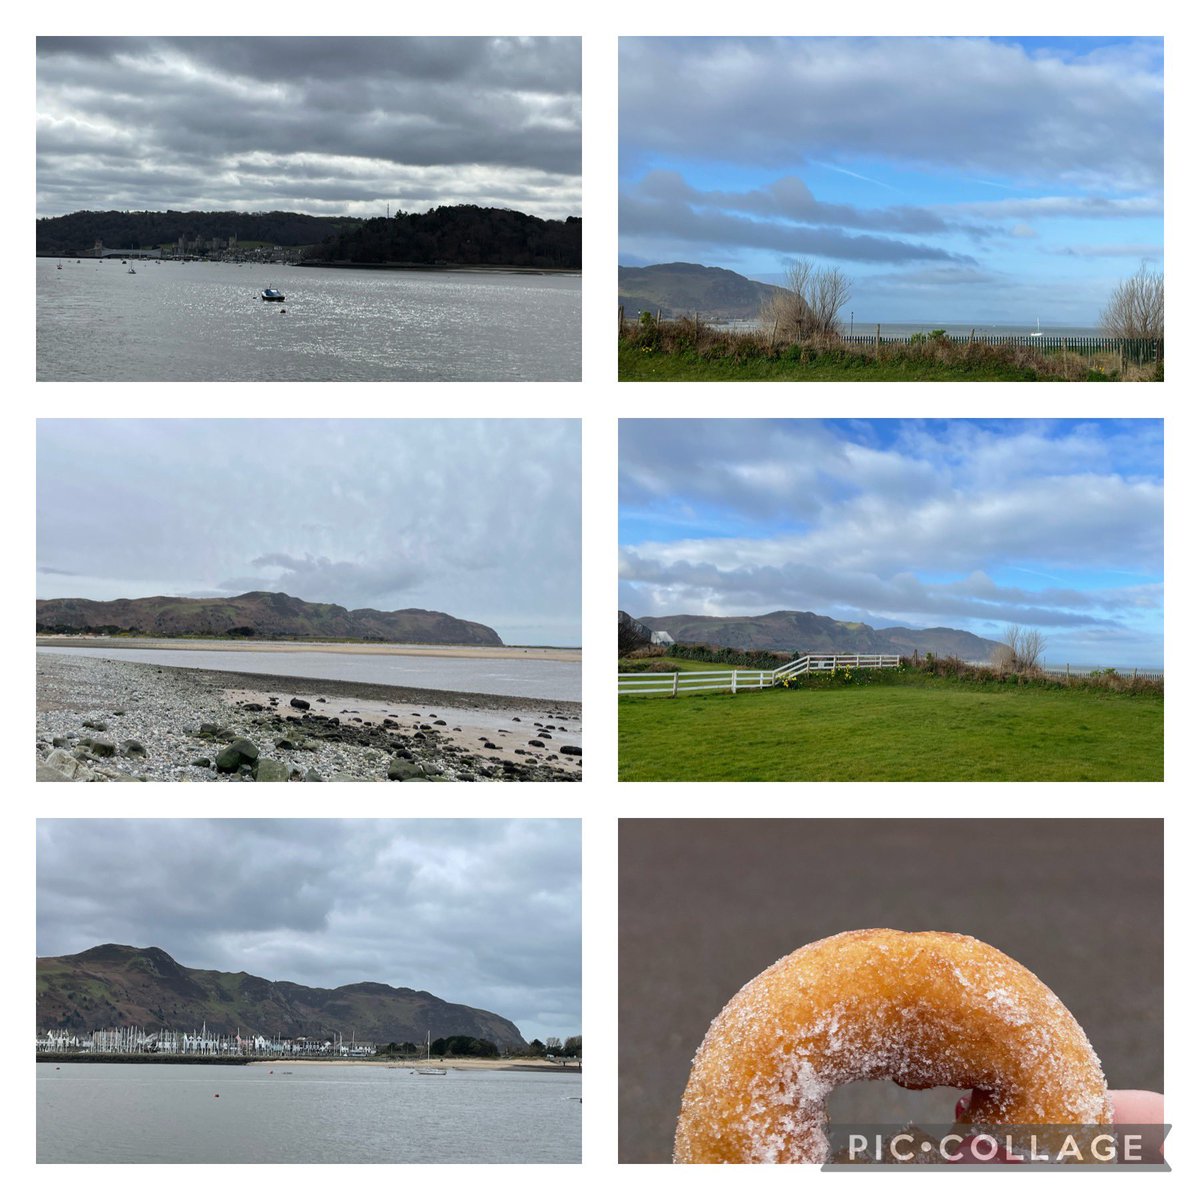 Deganwy & Llandudno, weather may not be great but it’s my happy place!